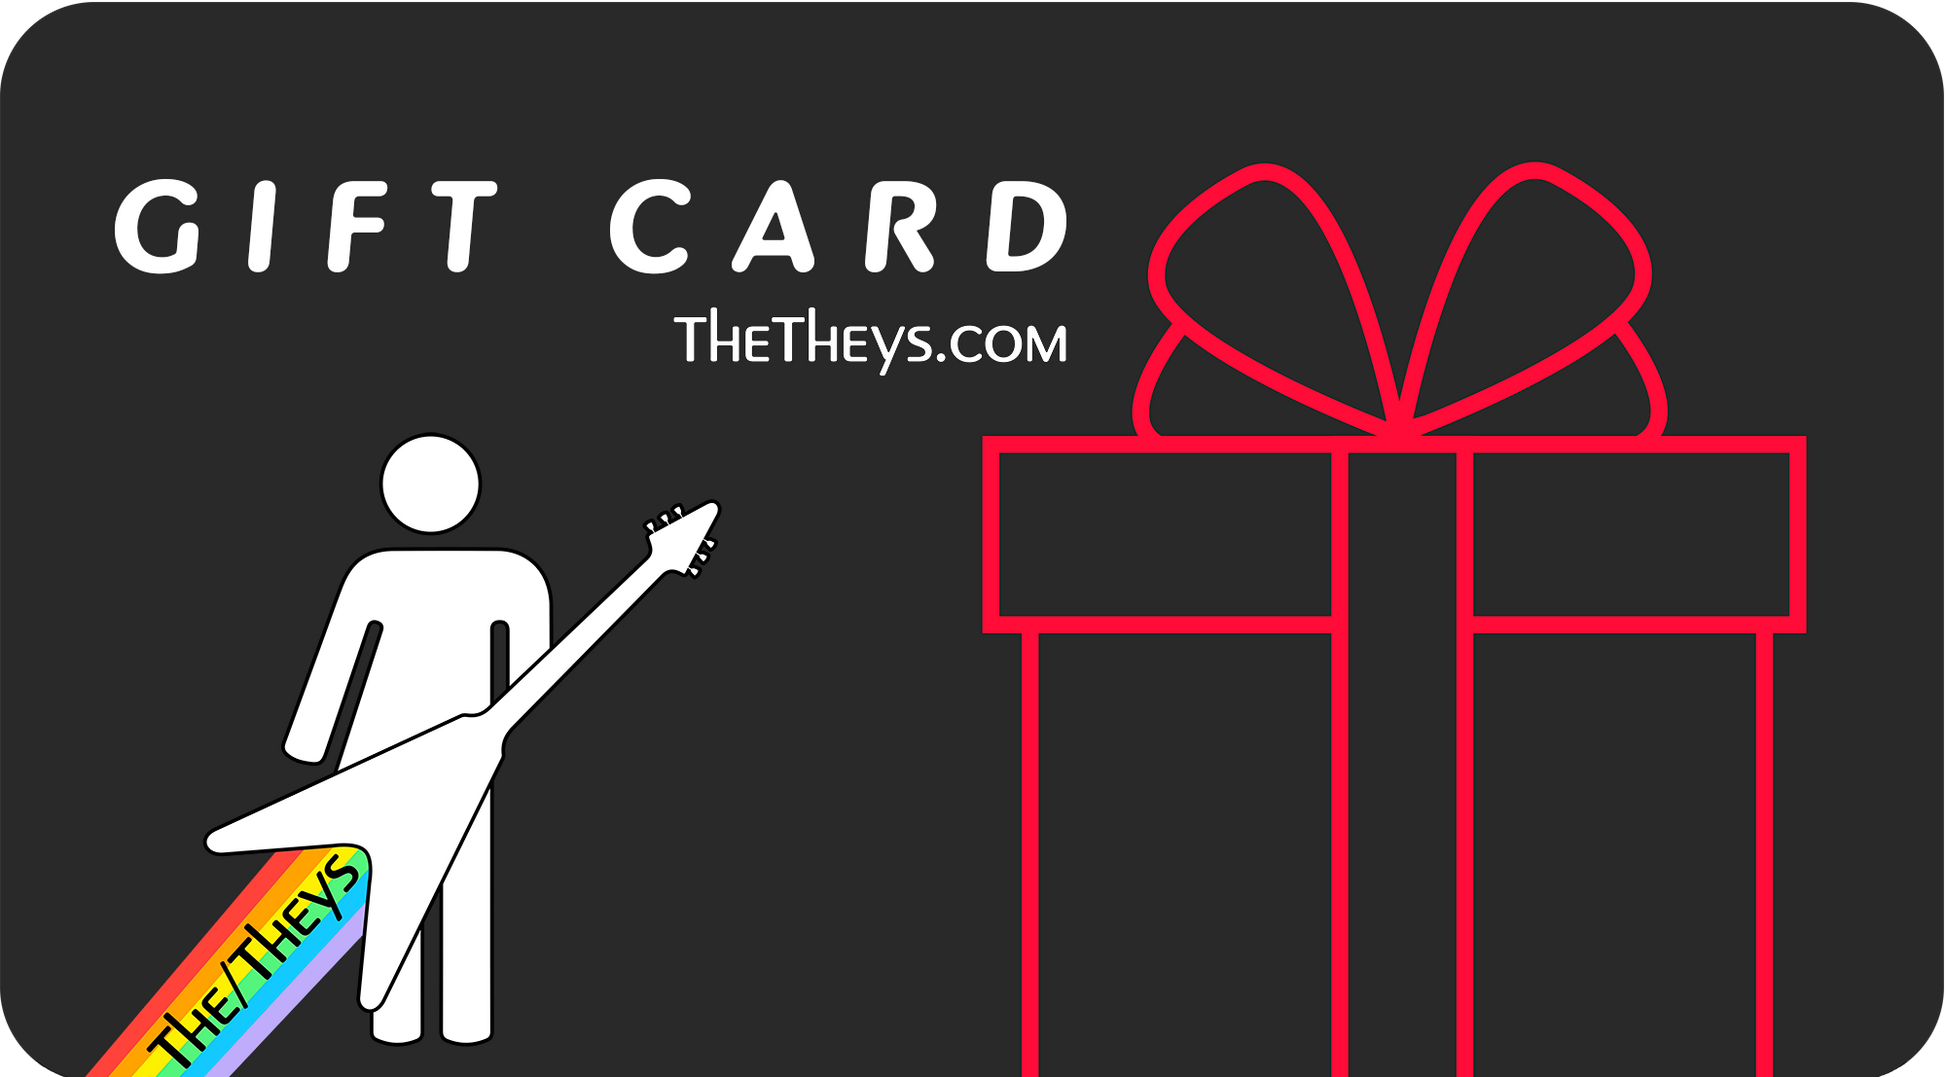 The/Theys Online Store Gift Card